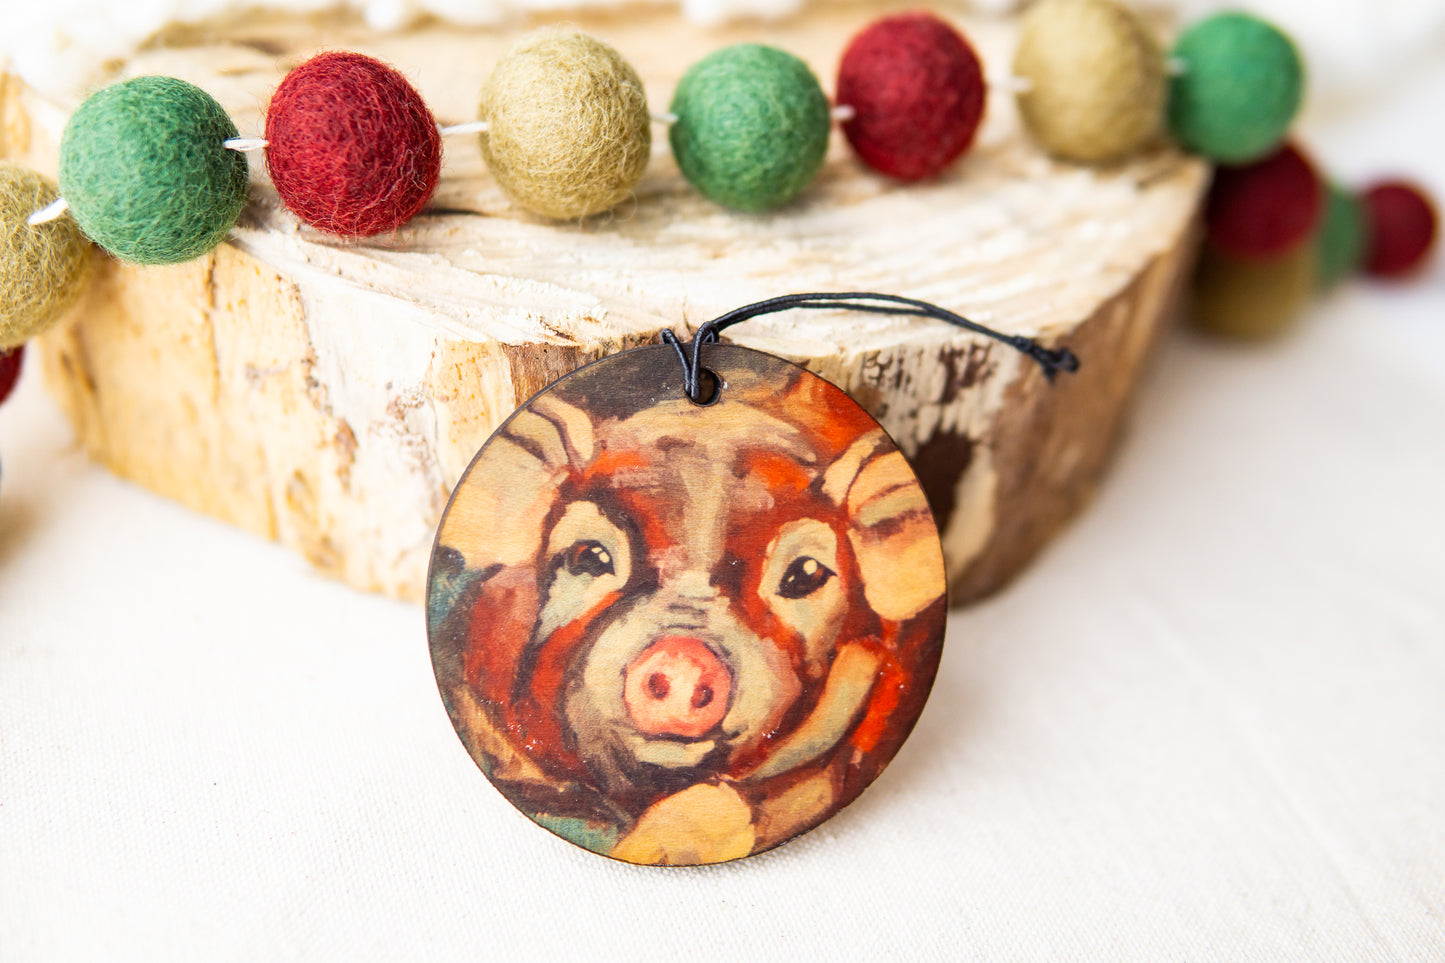 Red Pig Ornament By K. Huke